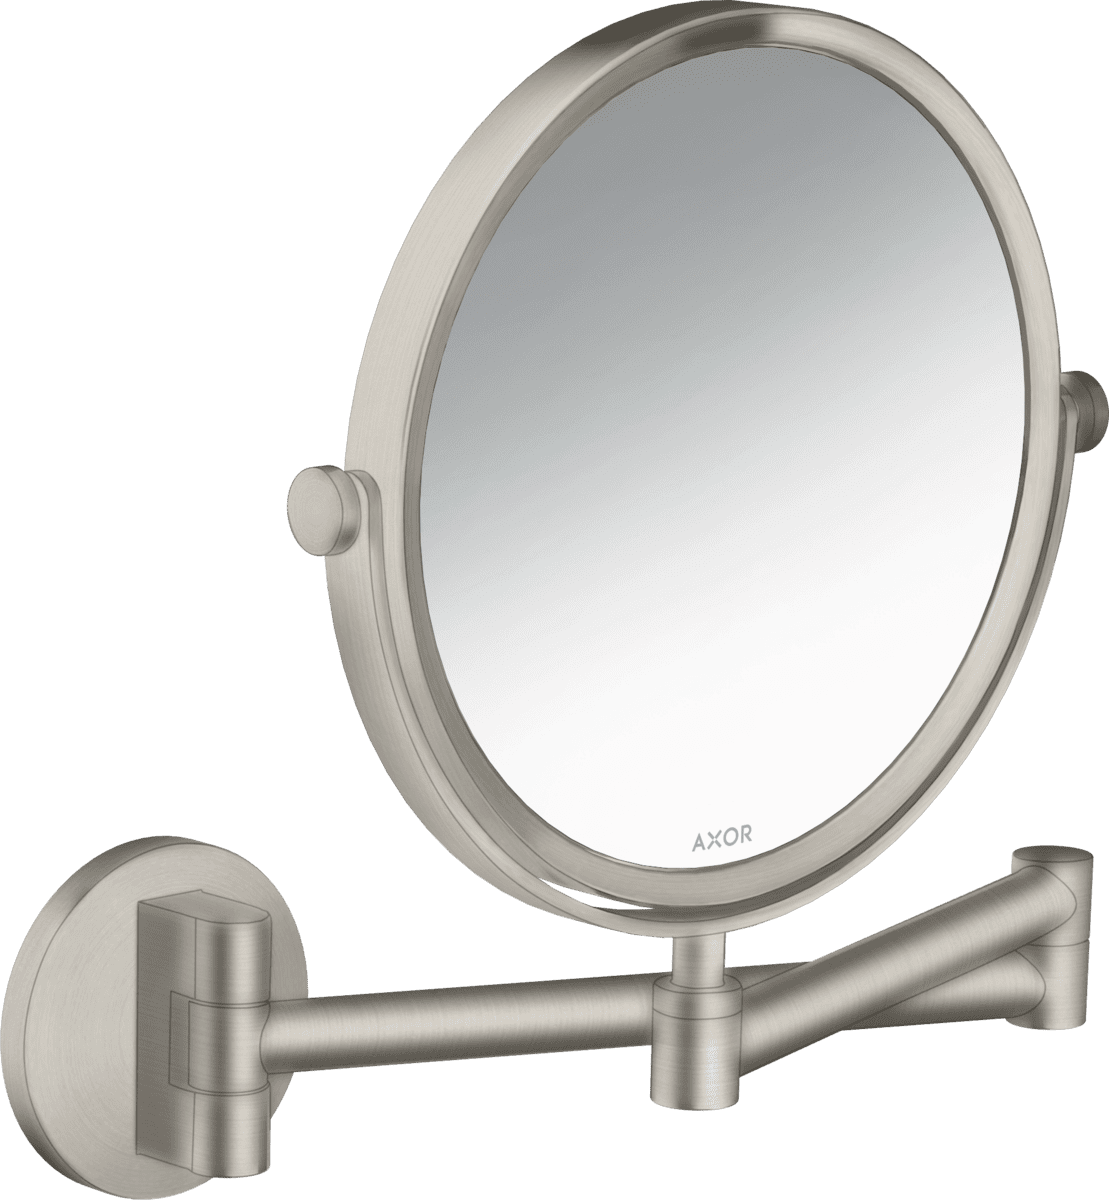 Picture of HANSGROHE AXOR Universal Circular Shaving mirror #42849800 - Stainless Steel Optic